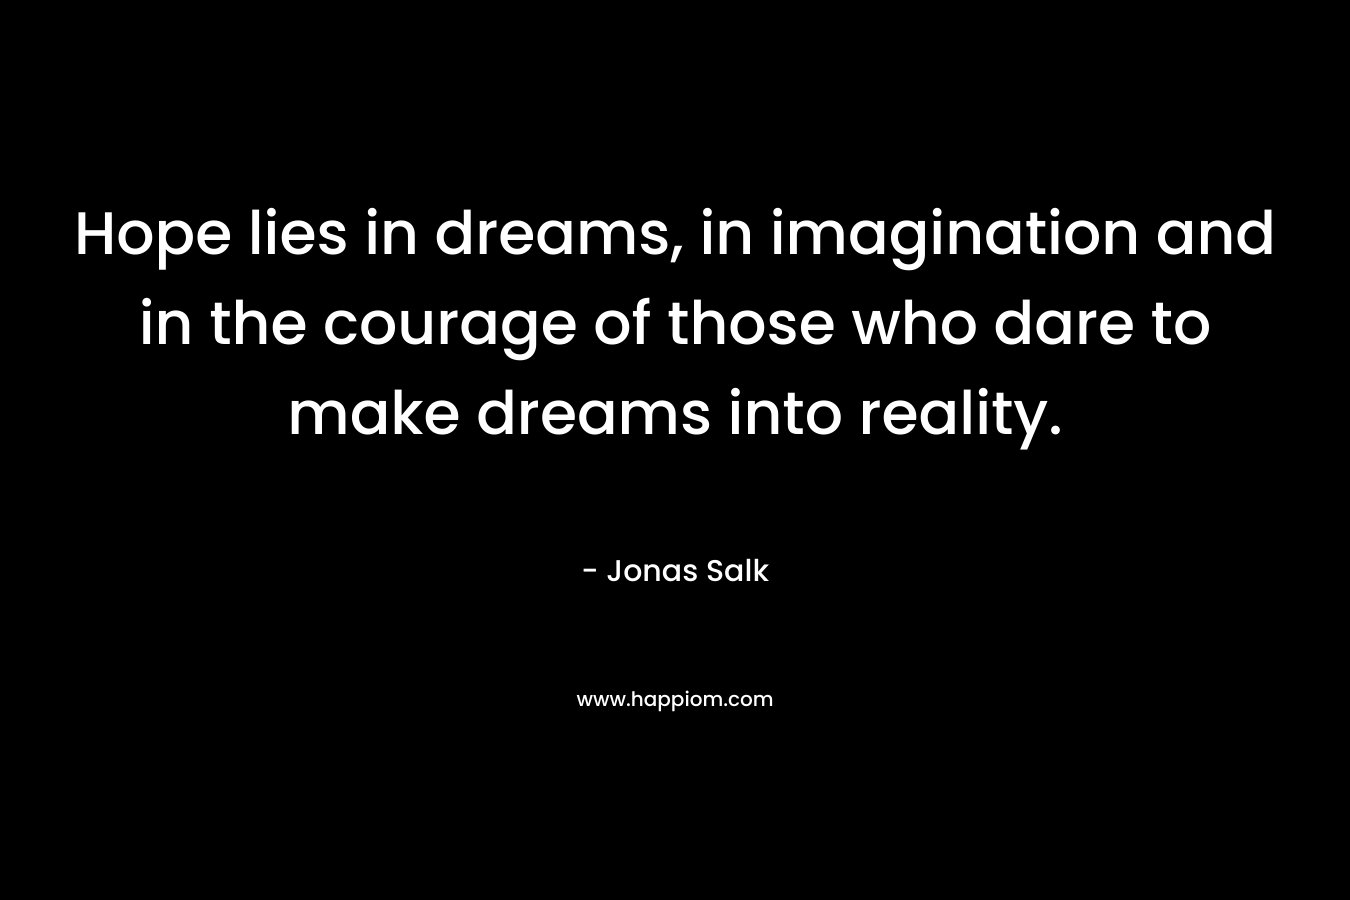 Hope lies in dreams, in imagination and in the courage of those who dare to make dreams into reality.